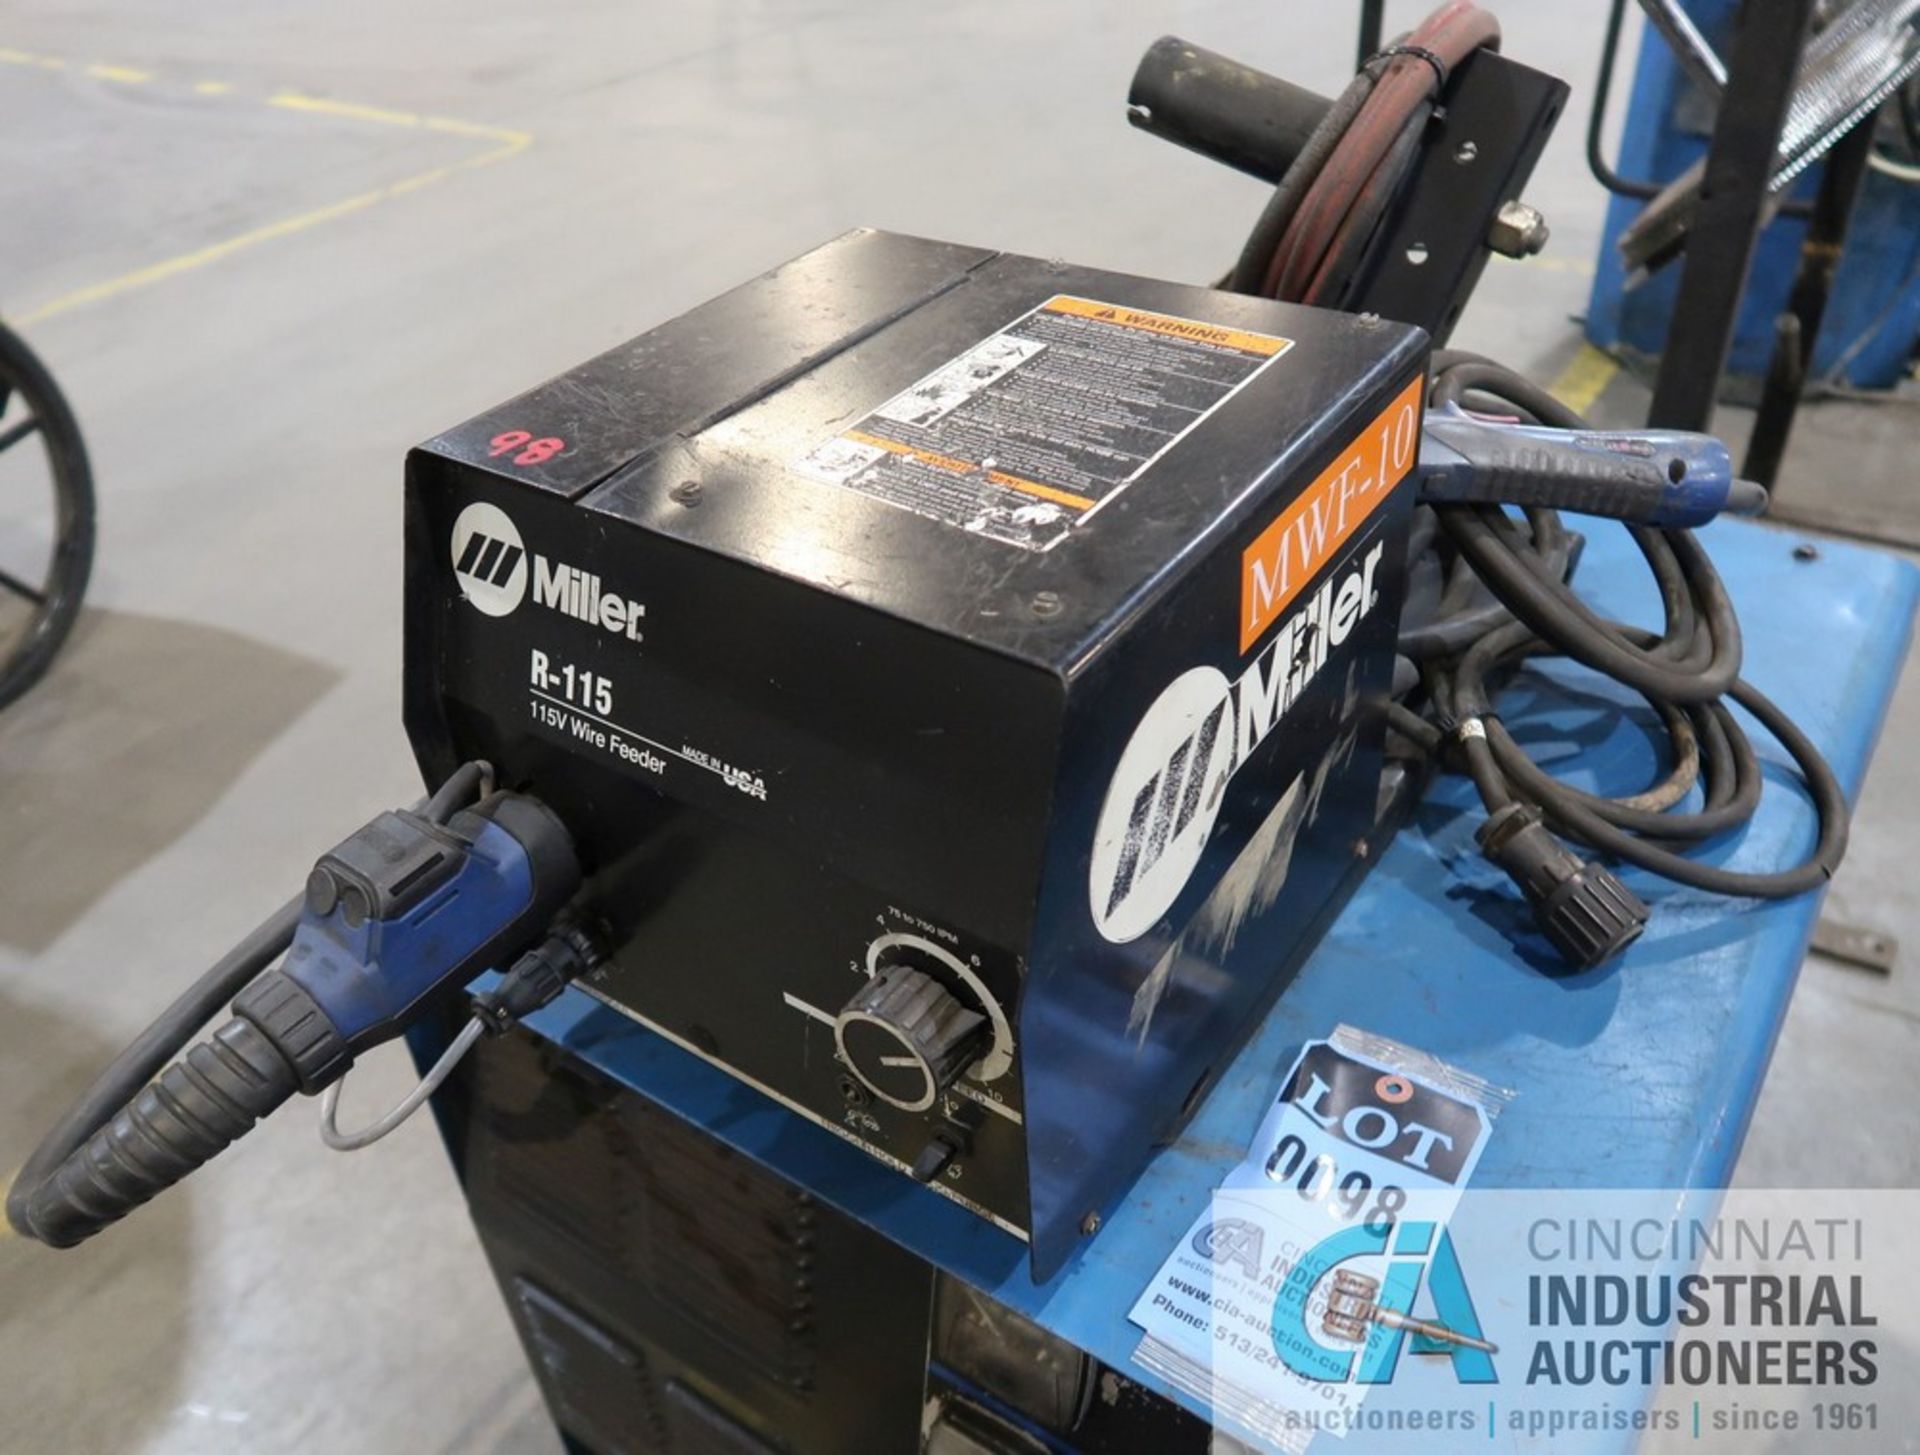 300 AMP MILLER CP-302 CV-DC WELDING POWER SOURCE; S/N LC485301, WITH MILLER R-115 115 VOLT WIRE - Image 5 of 5